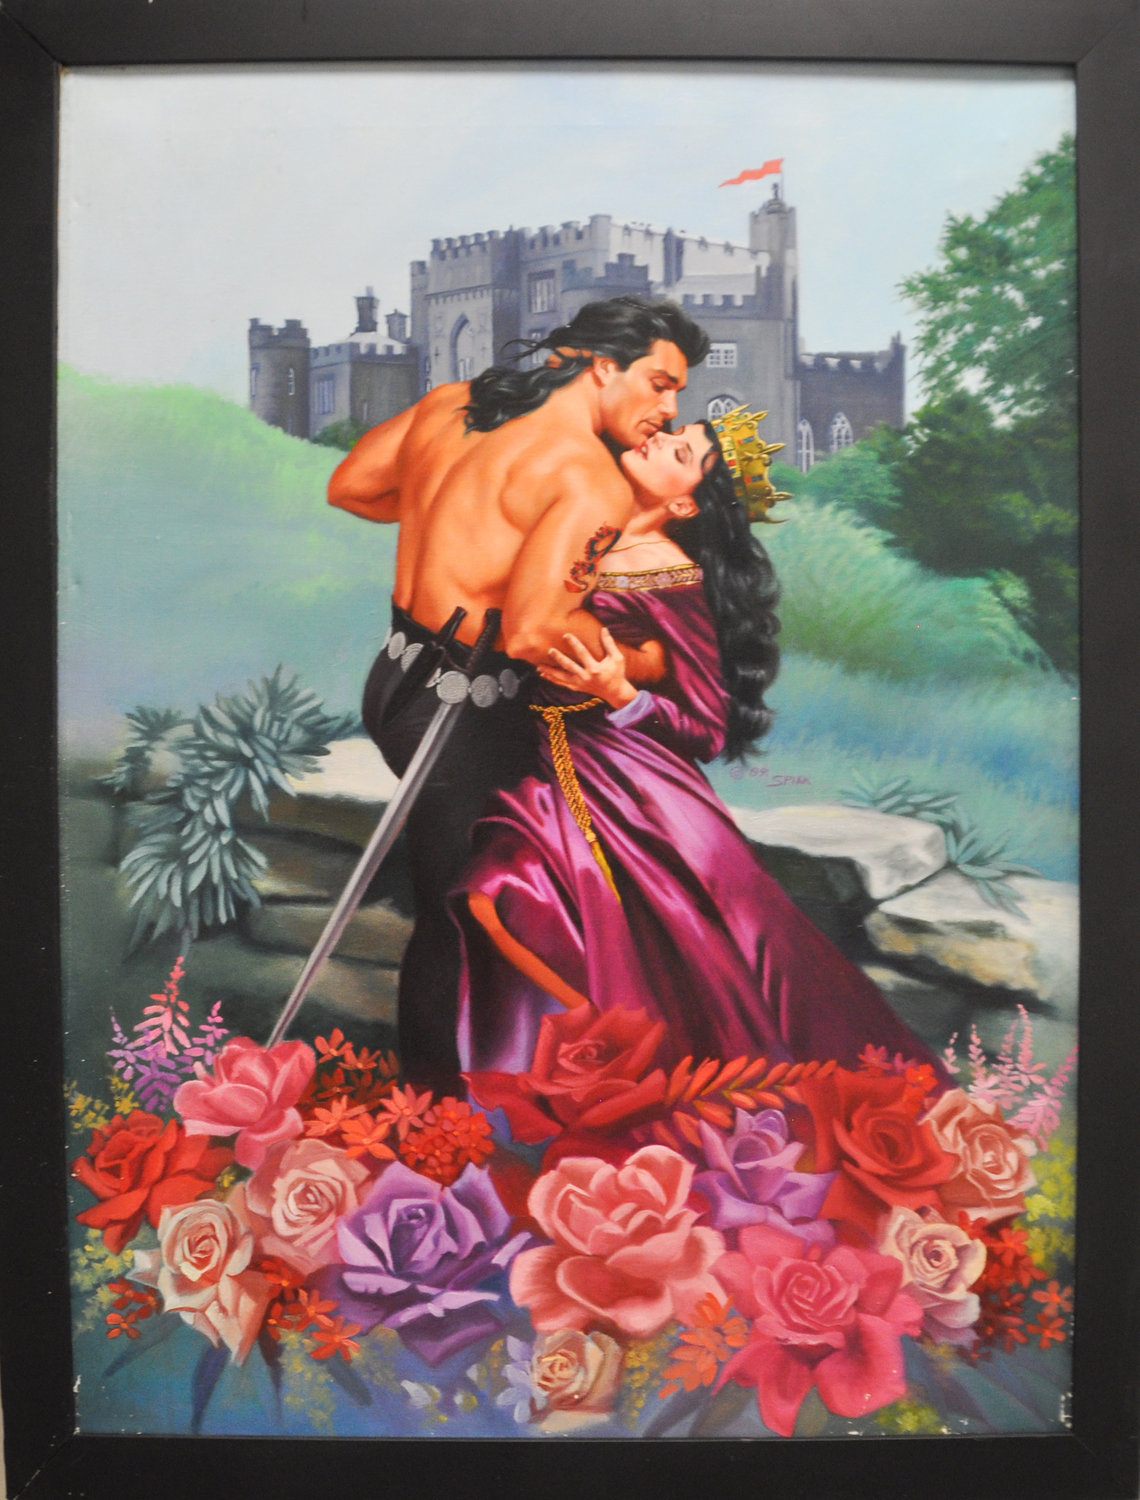 The new art exhibit at the Narrowsburg Union “celebrates the art of illustration in all shapes and styles,” including the “sweeping fantasy of classic romance novels.”